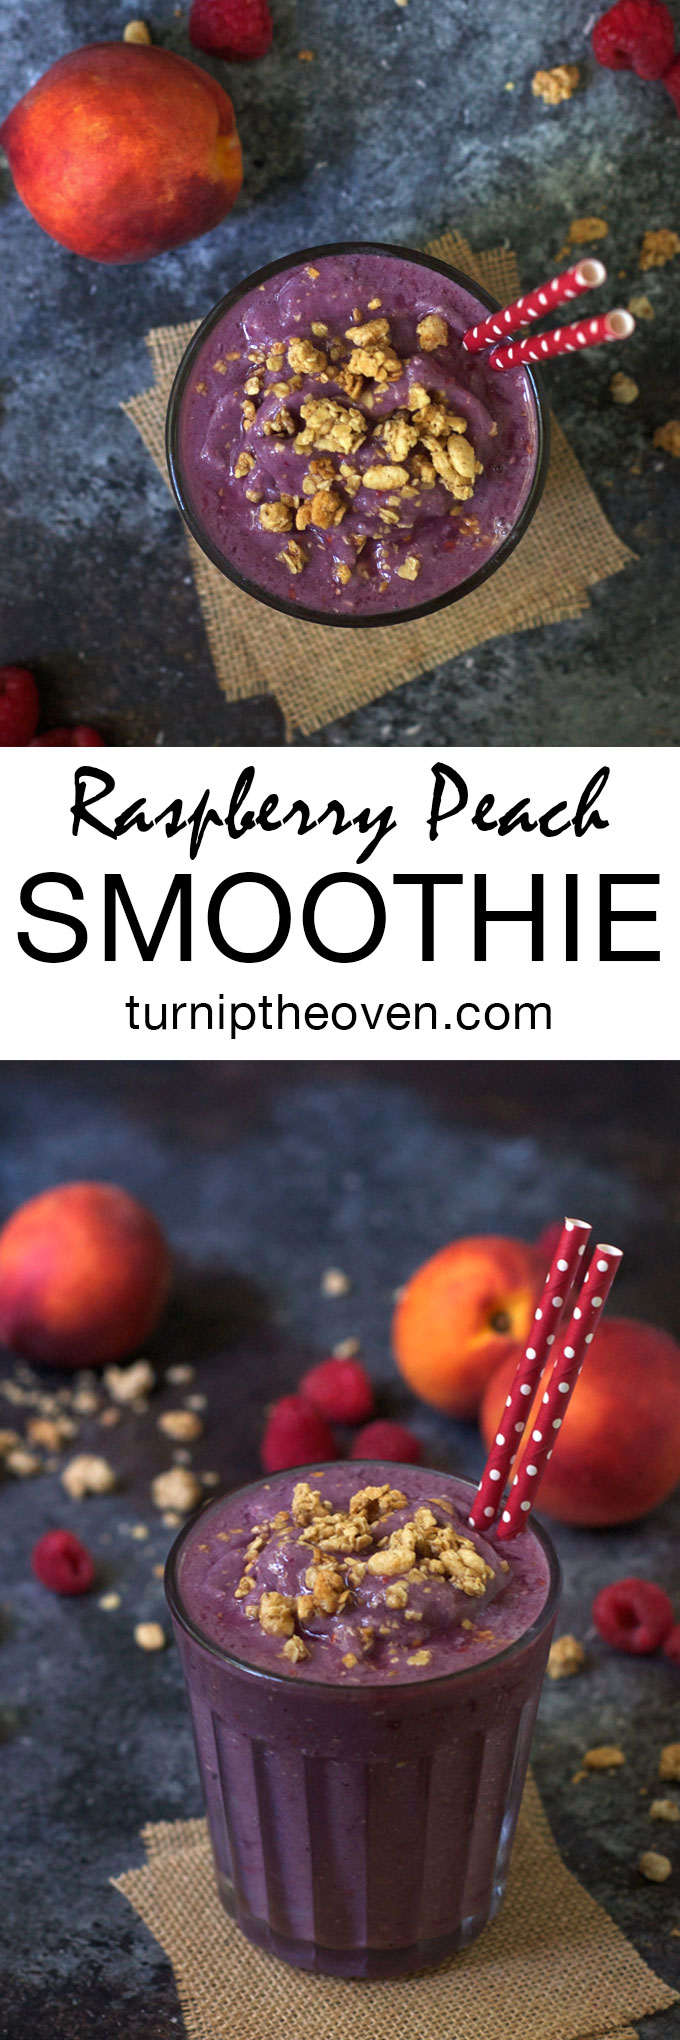 This gluten-free, vegan smoothie is bursting with juicy raspberry and peach flavor! Use either fresh or frozen fruit for a satisfying and healthy breakfast, any time of the year.